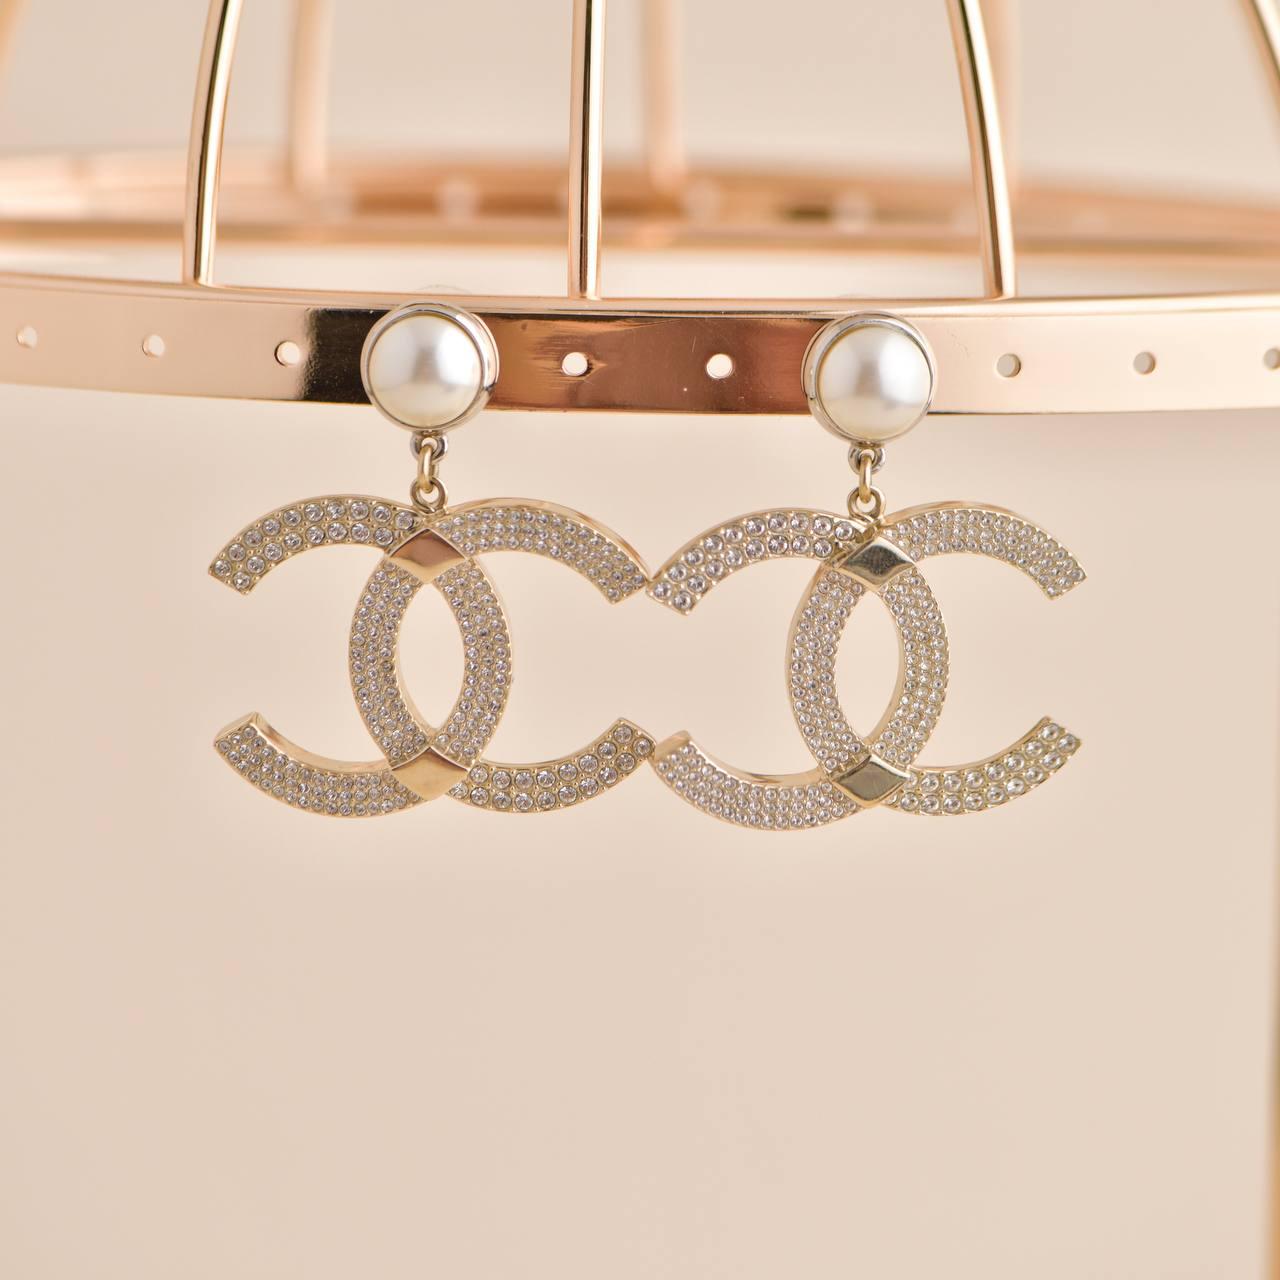 Brilliant Cut Chanel CC Faux Pearl Earrings From The 2021 Collection For Sale